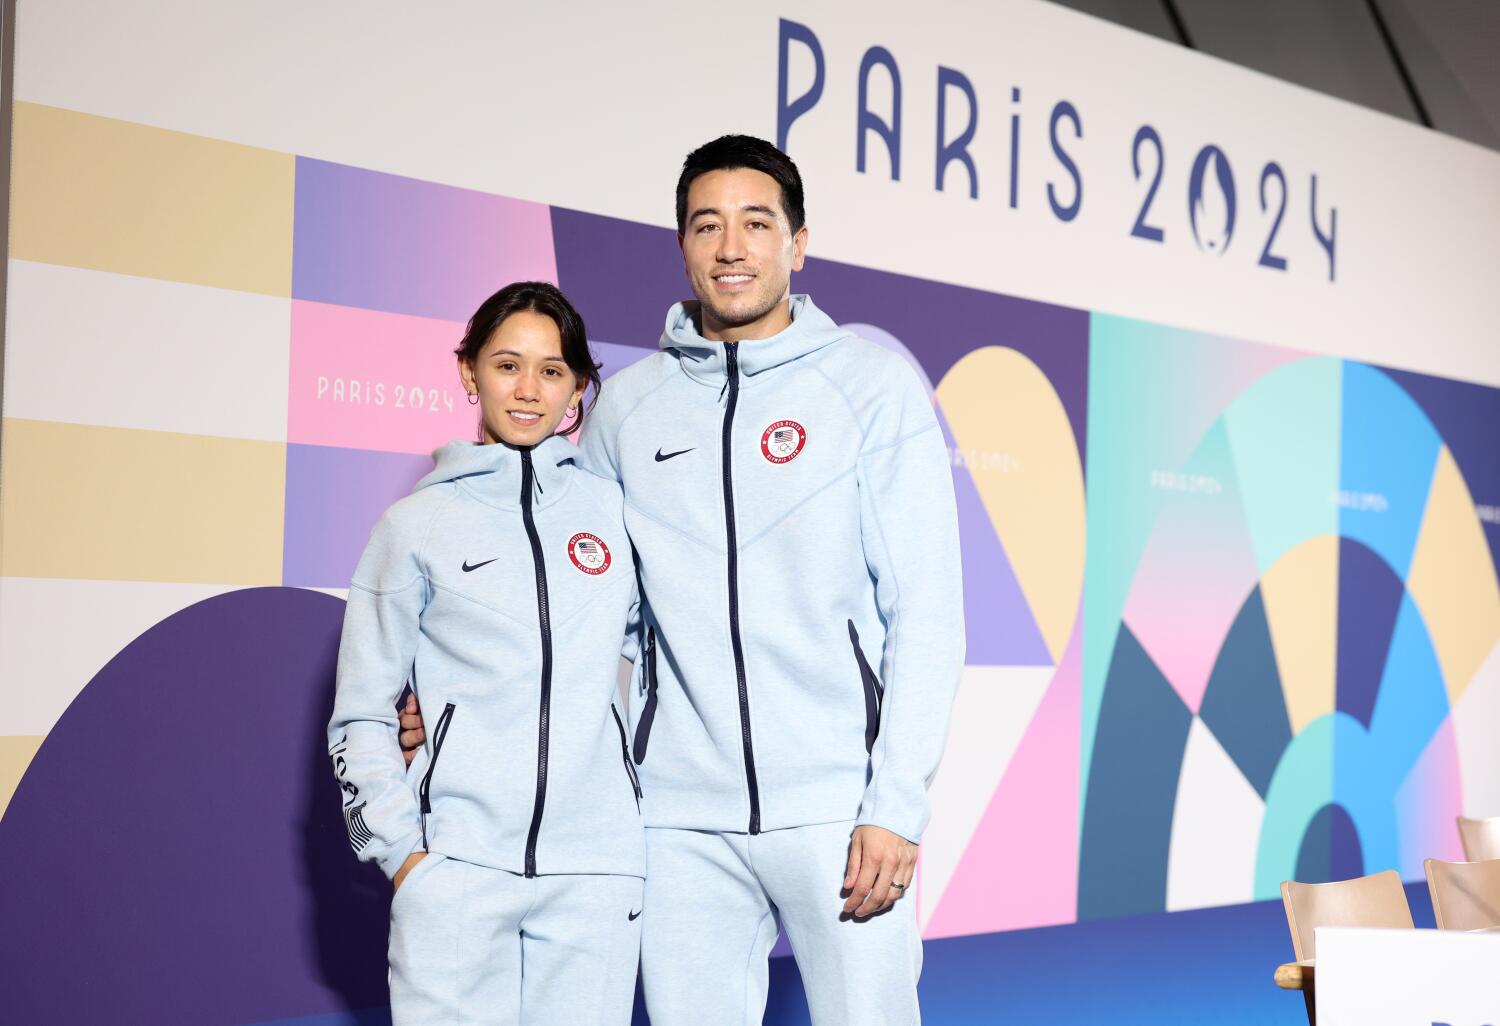 The first couple of U.S. fencing credit one another for their Olympic successes